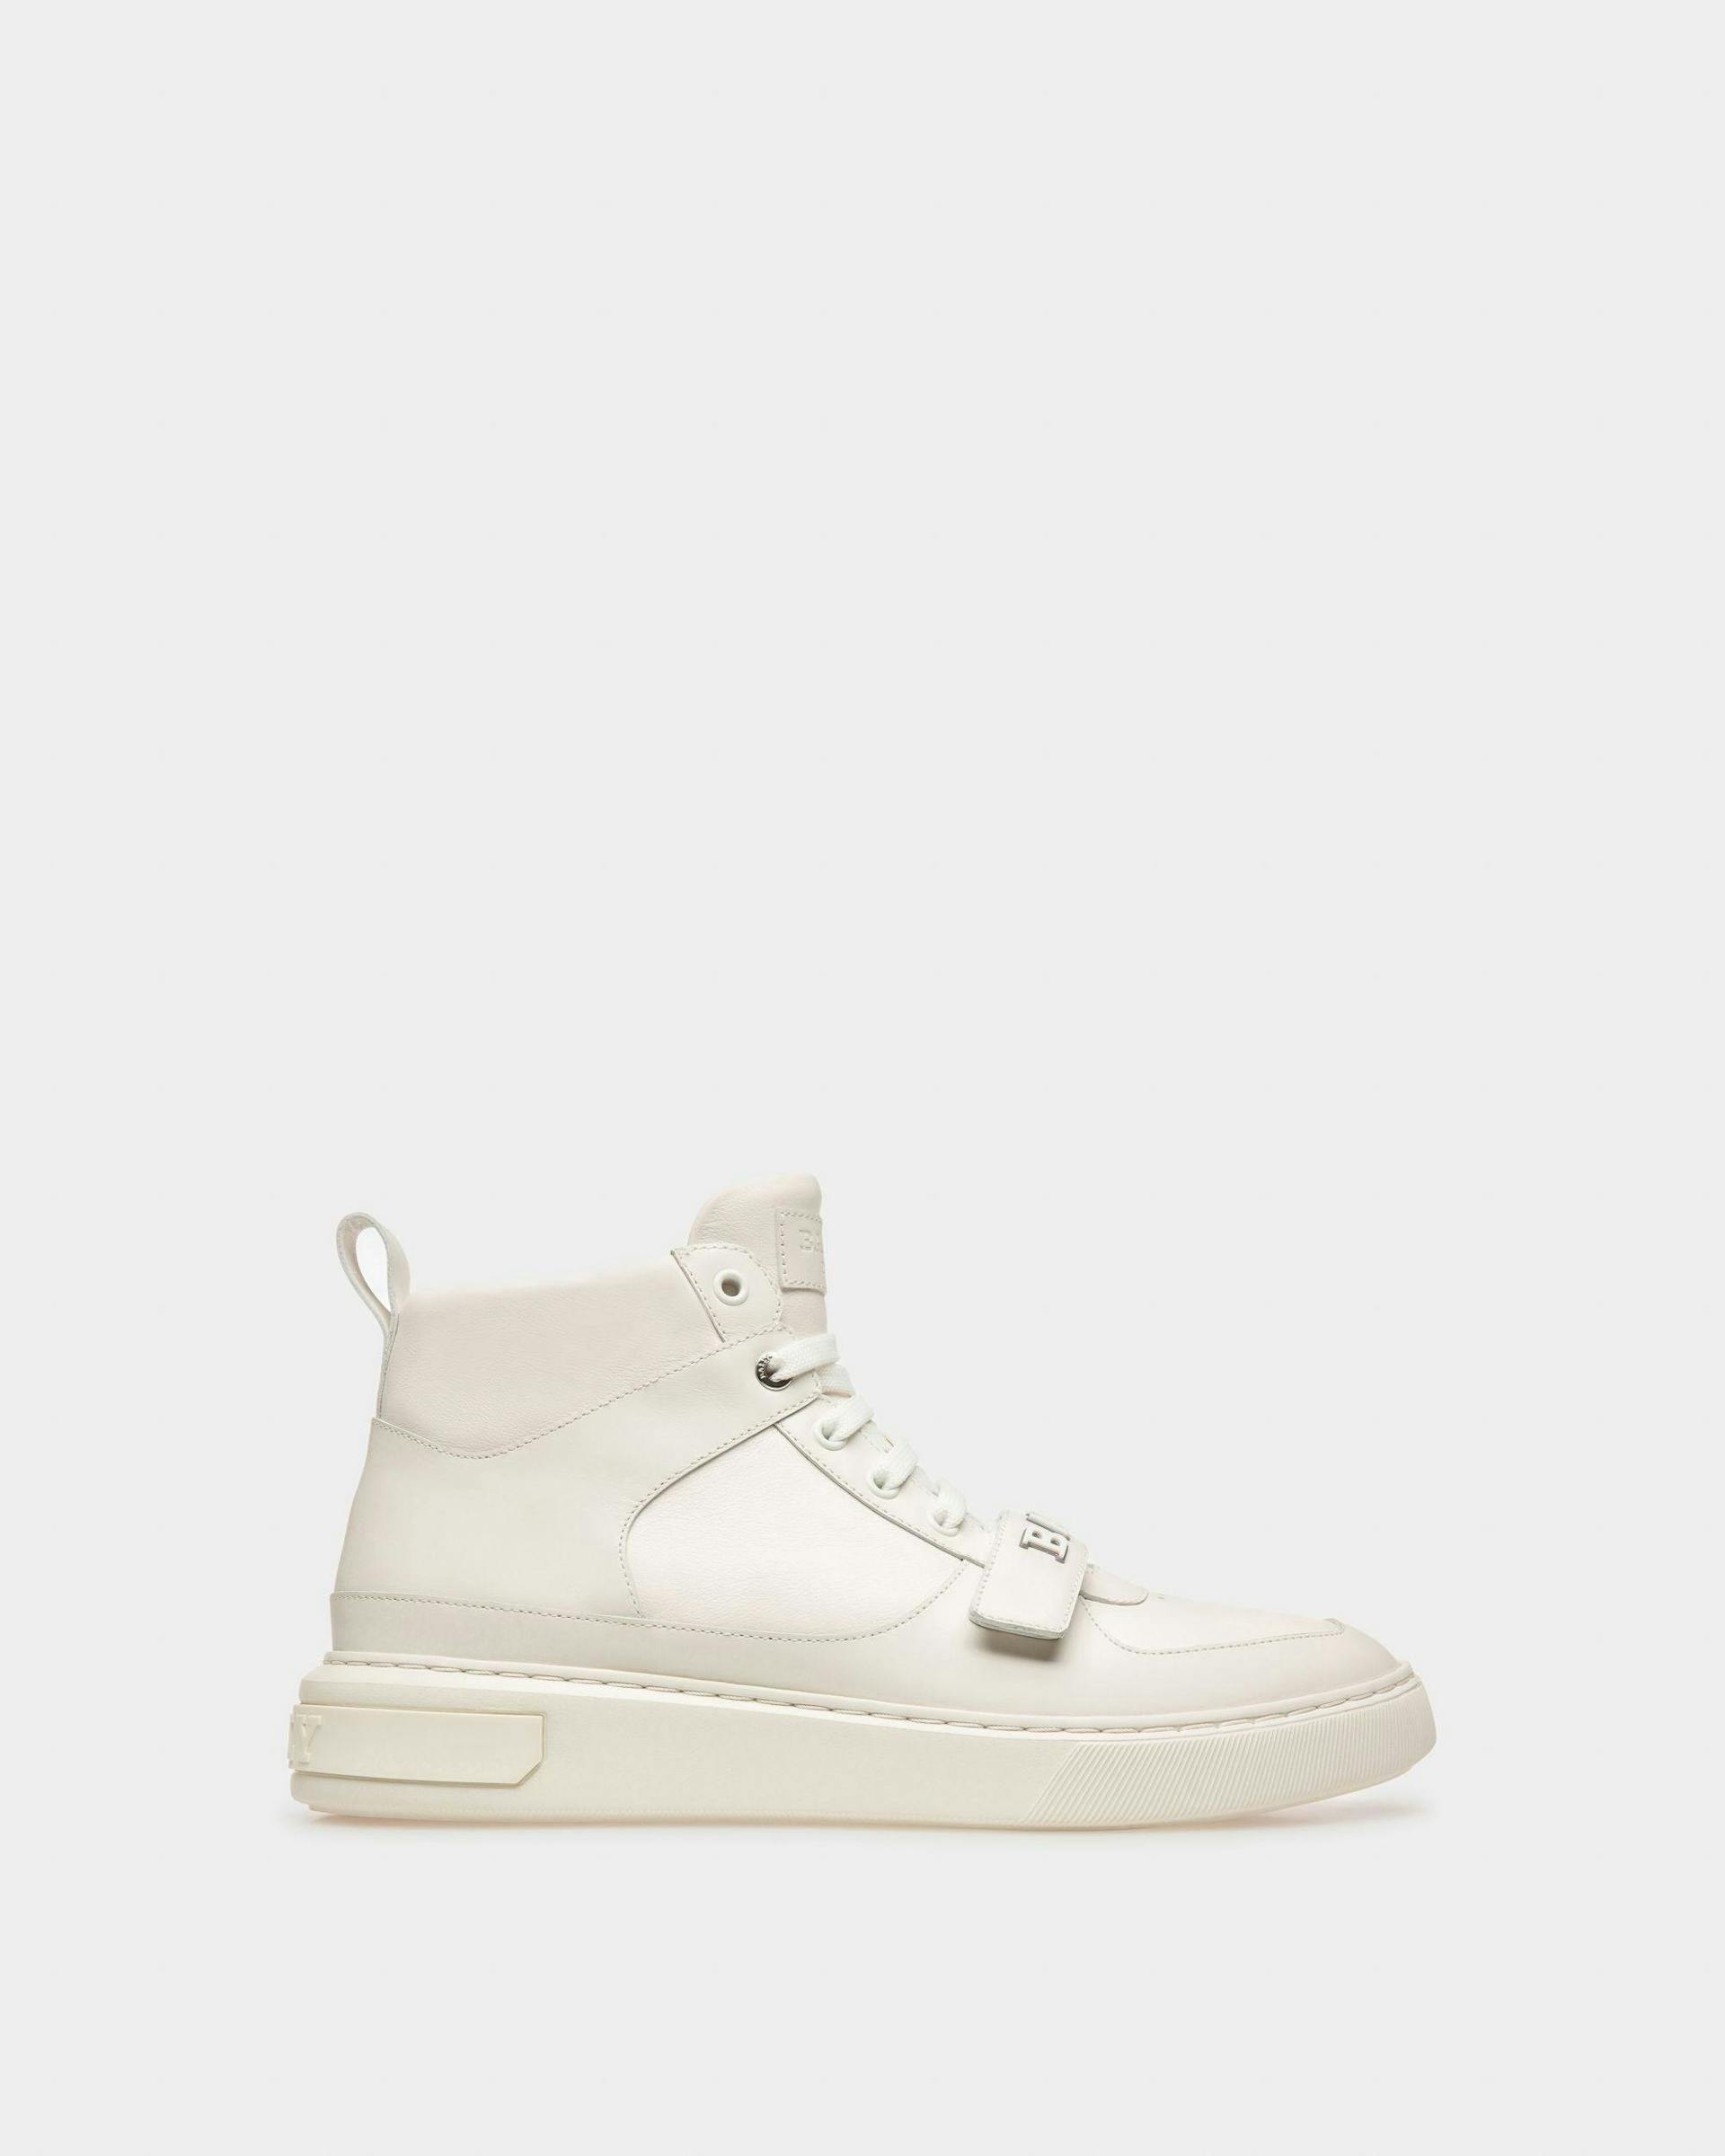 Merryk Leather Sneakers In White - Men's - Bally - 01